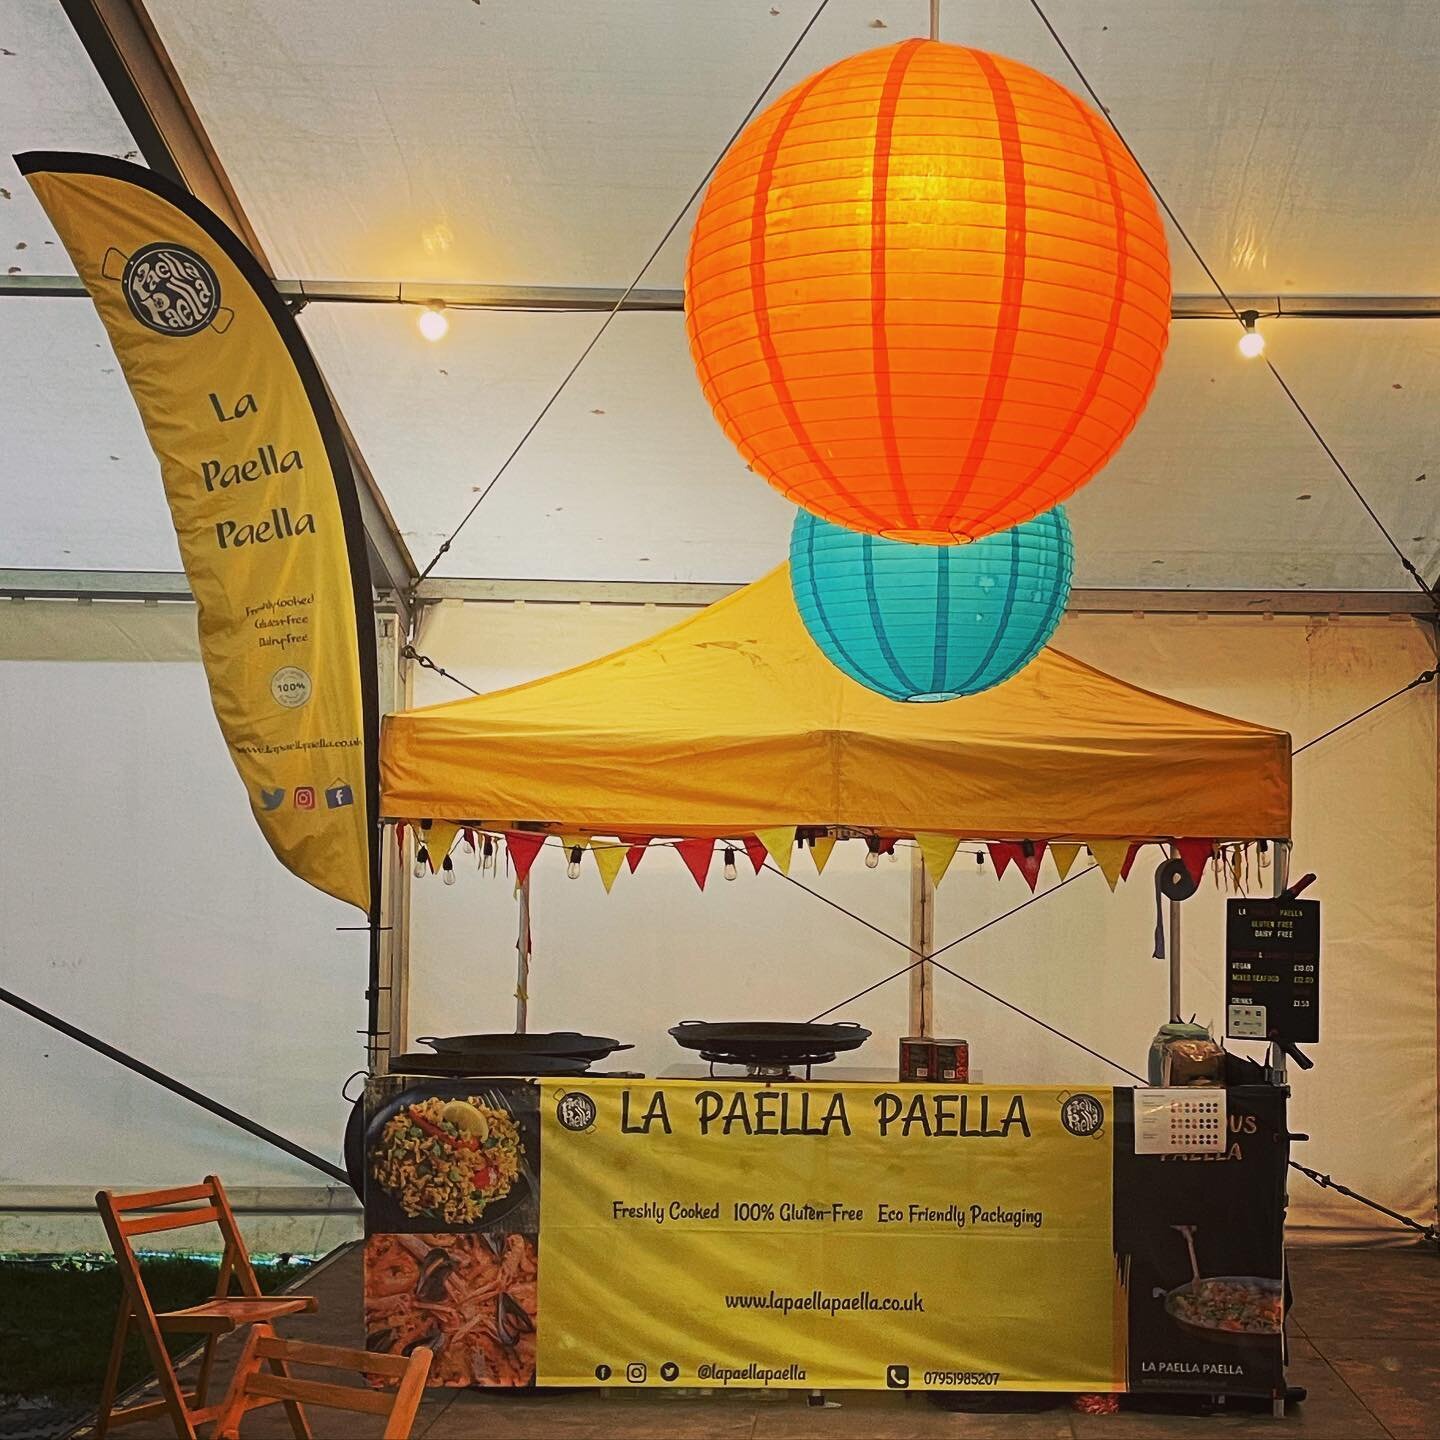 All Set up and ready for the next few days in @hopfarm for the @wealdentimes Midwinter Fair.
🎟️ 🎟️🎟️🎟️🎟️🎟️🎟️🎟️🎟️🎟️
.
.
.
#foodforthought #paella #ukchef #paellachef #takeawayfood #midwinterfair #thehops #veganfood #healthyfood #seafooddish 